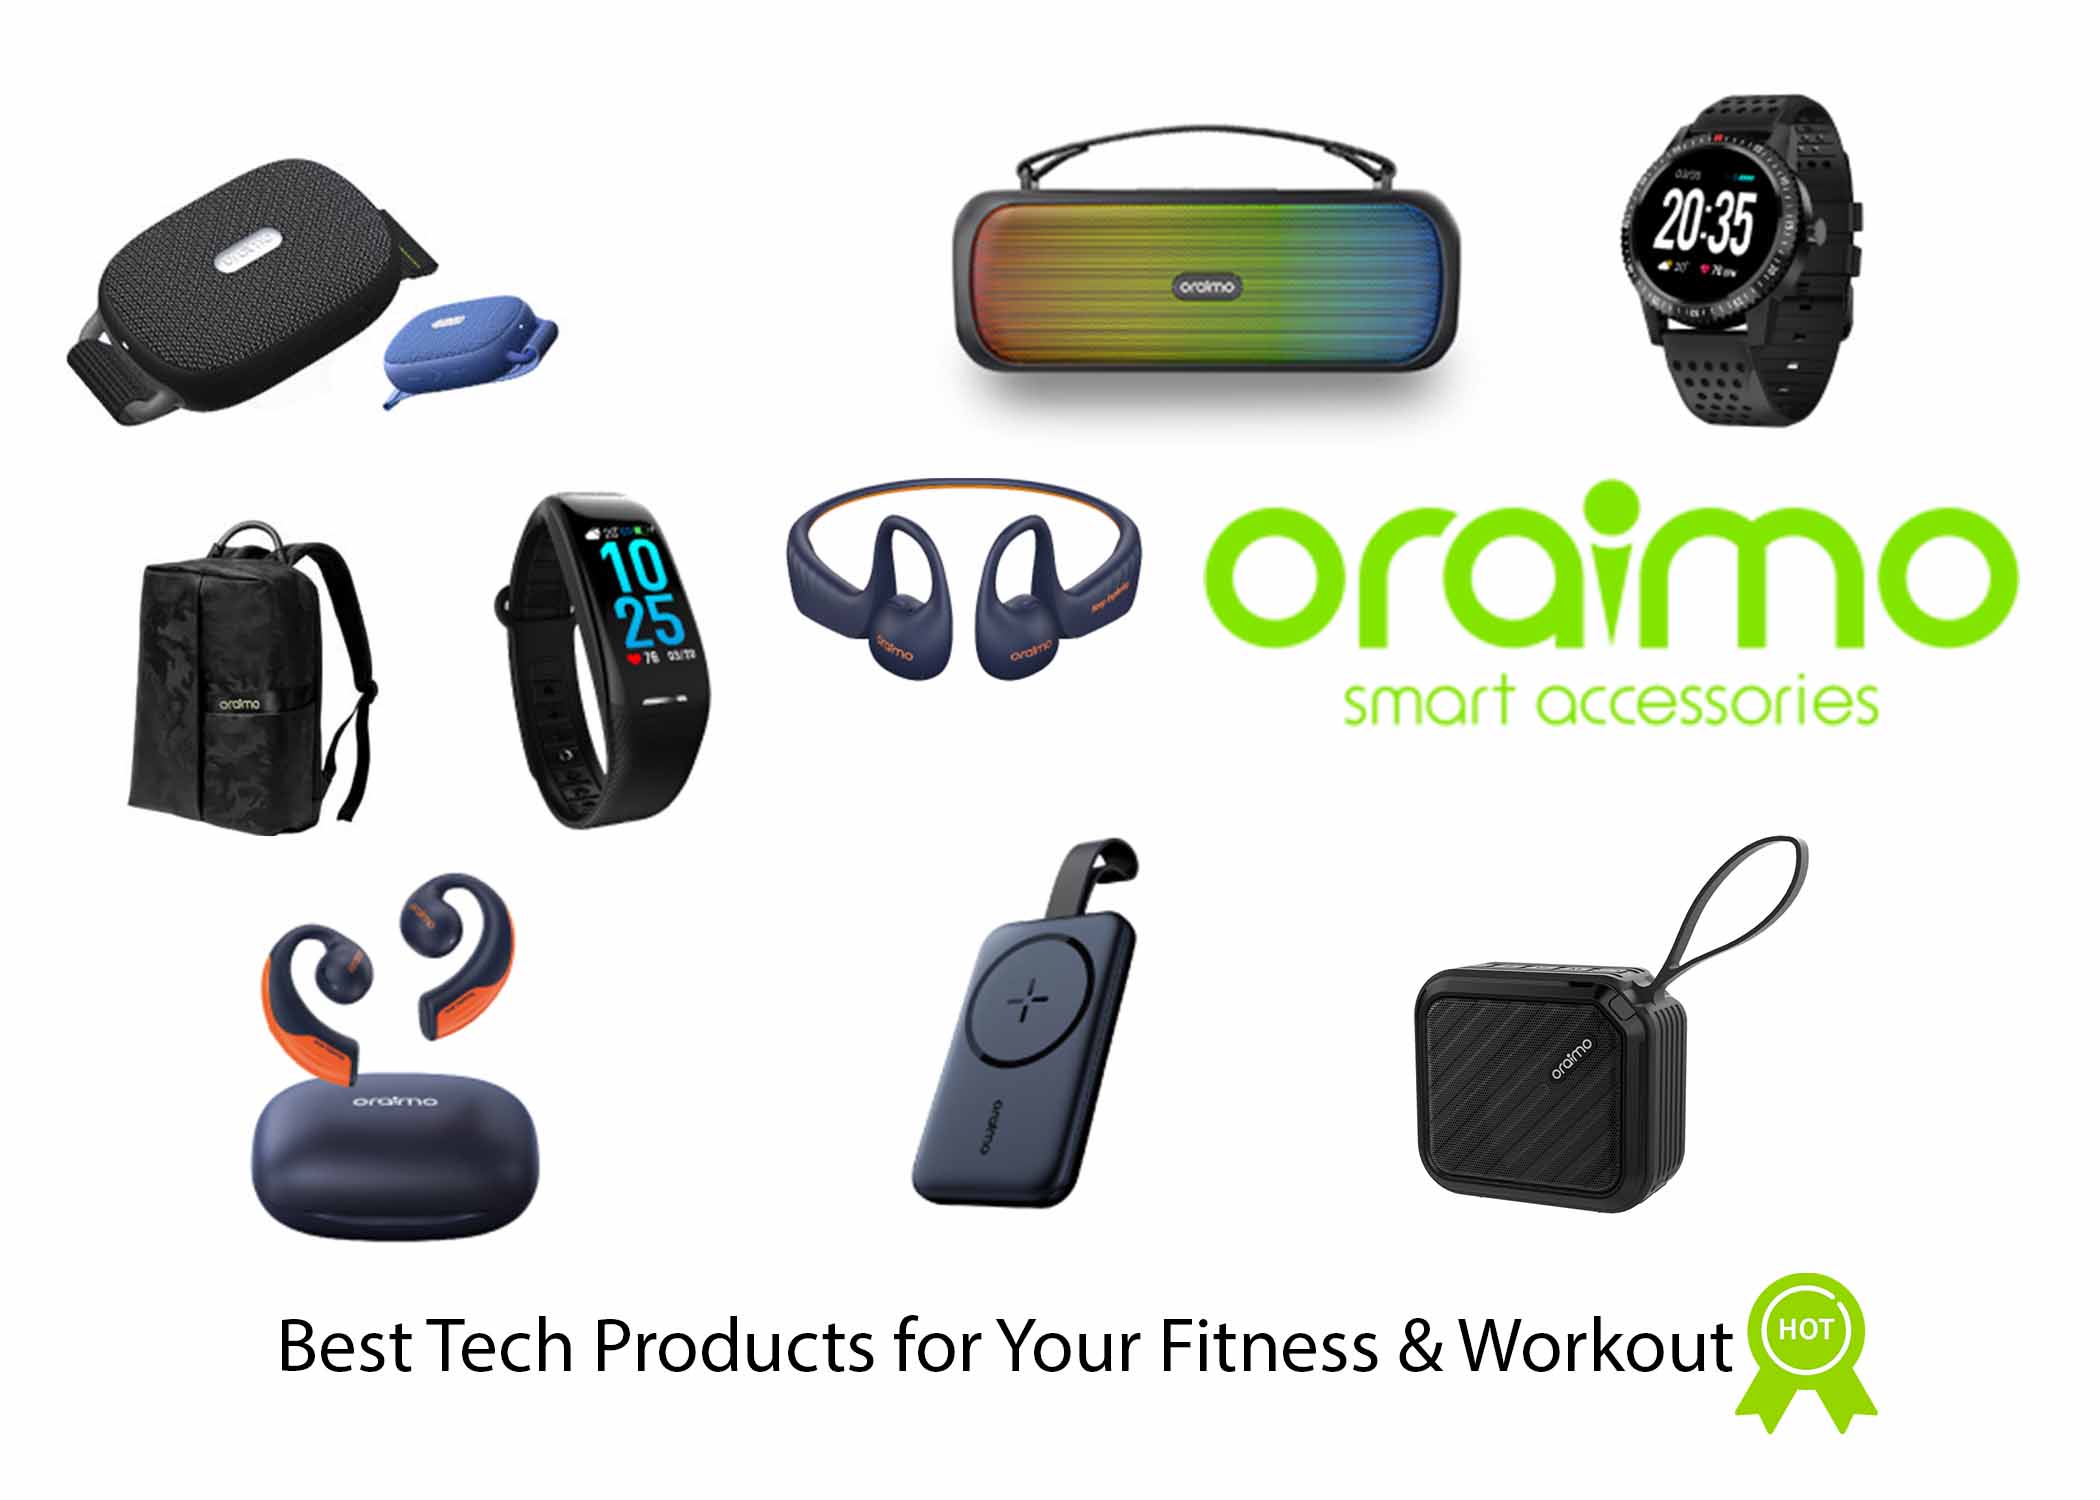 Oraimo - 10 Best Tech Products for Your Fitness & Workout